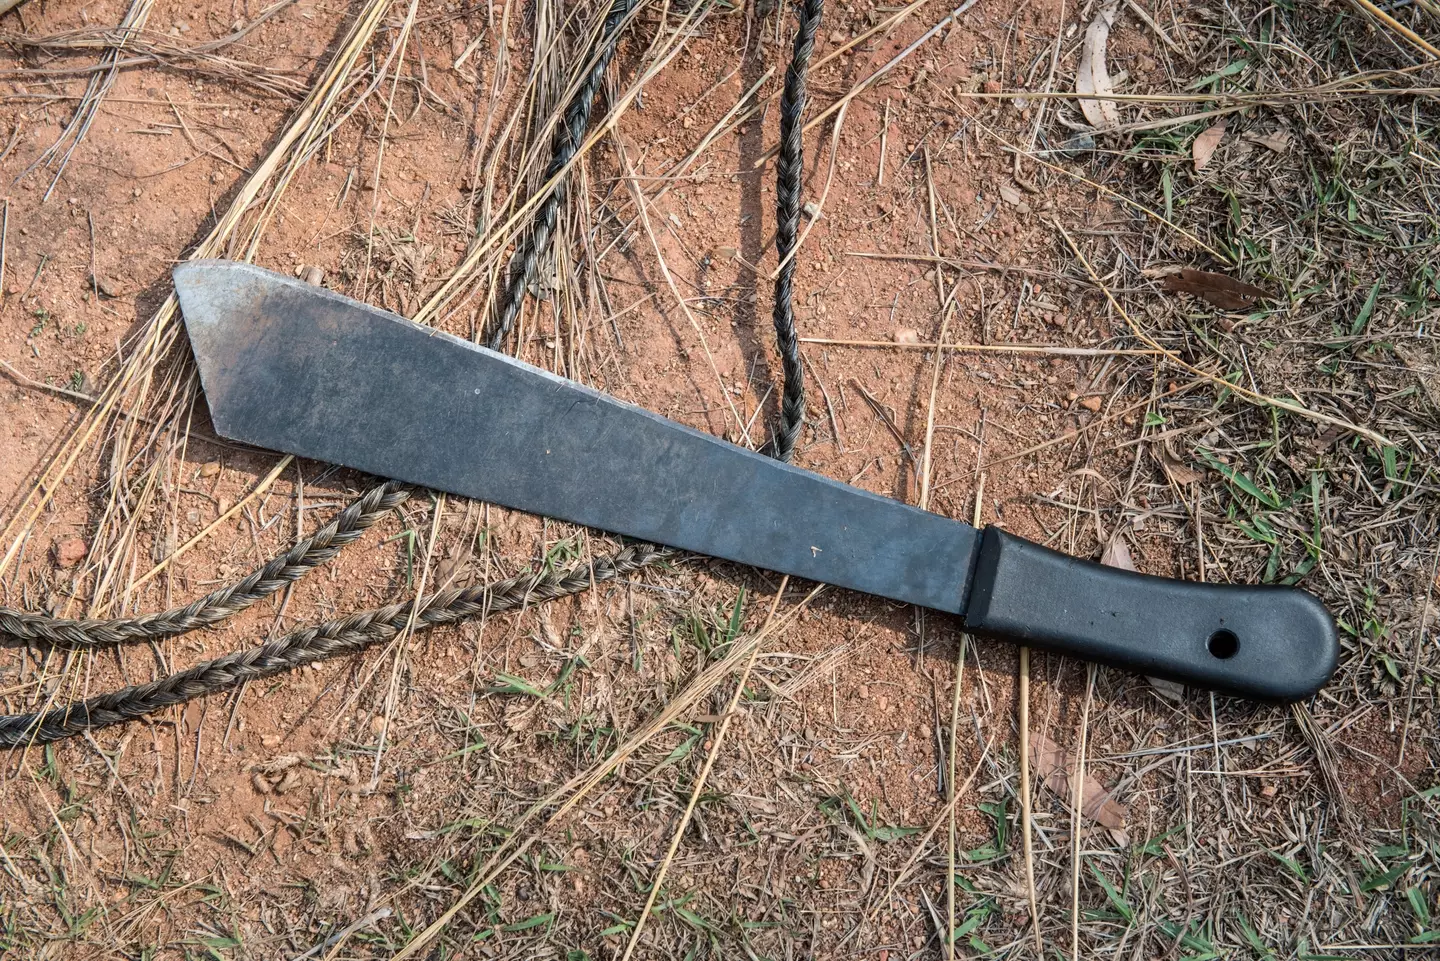 Triad used machetes as weapons.